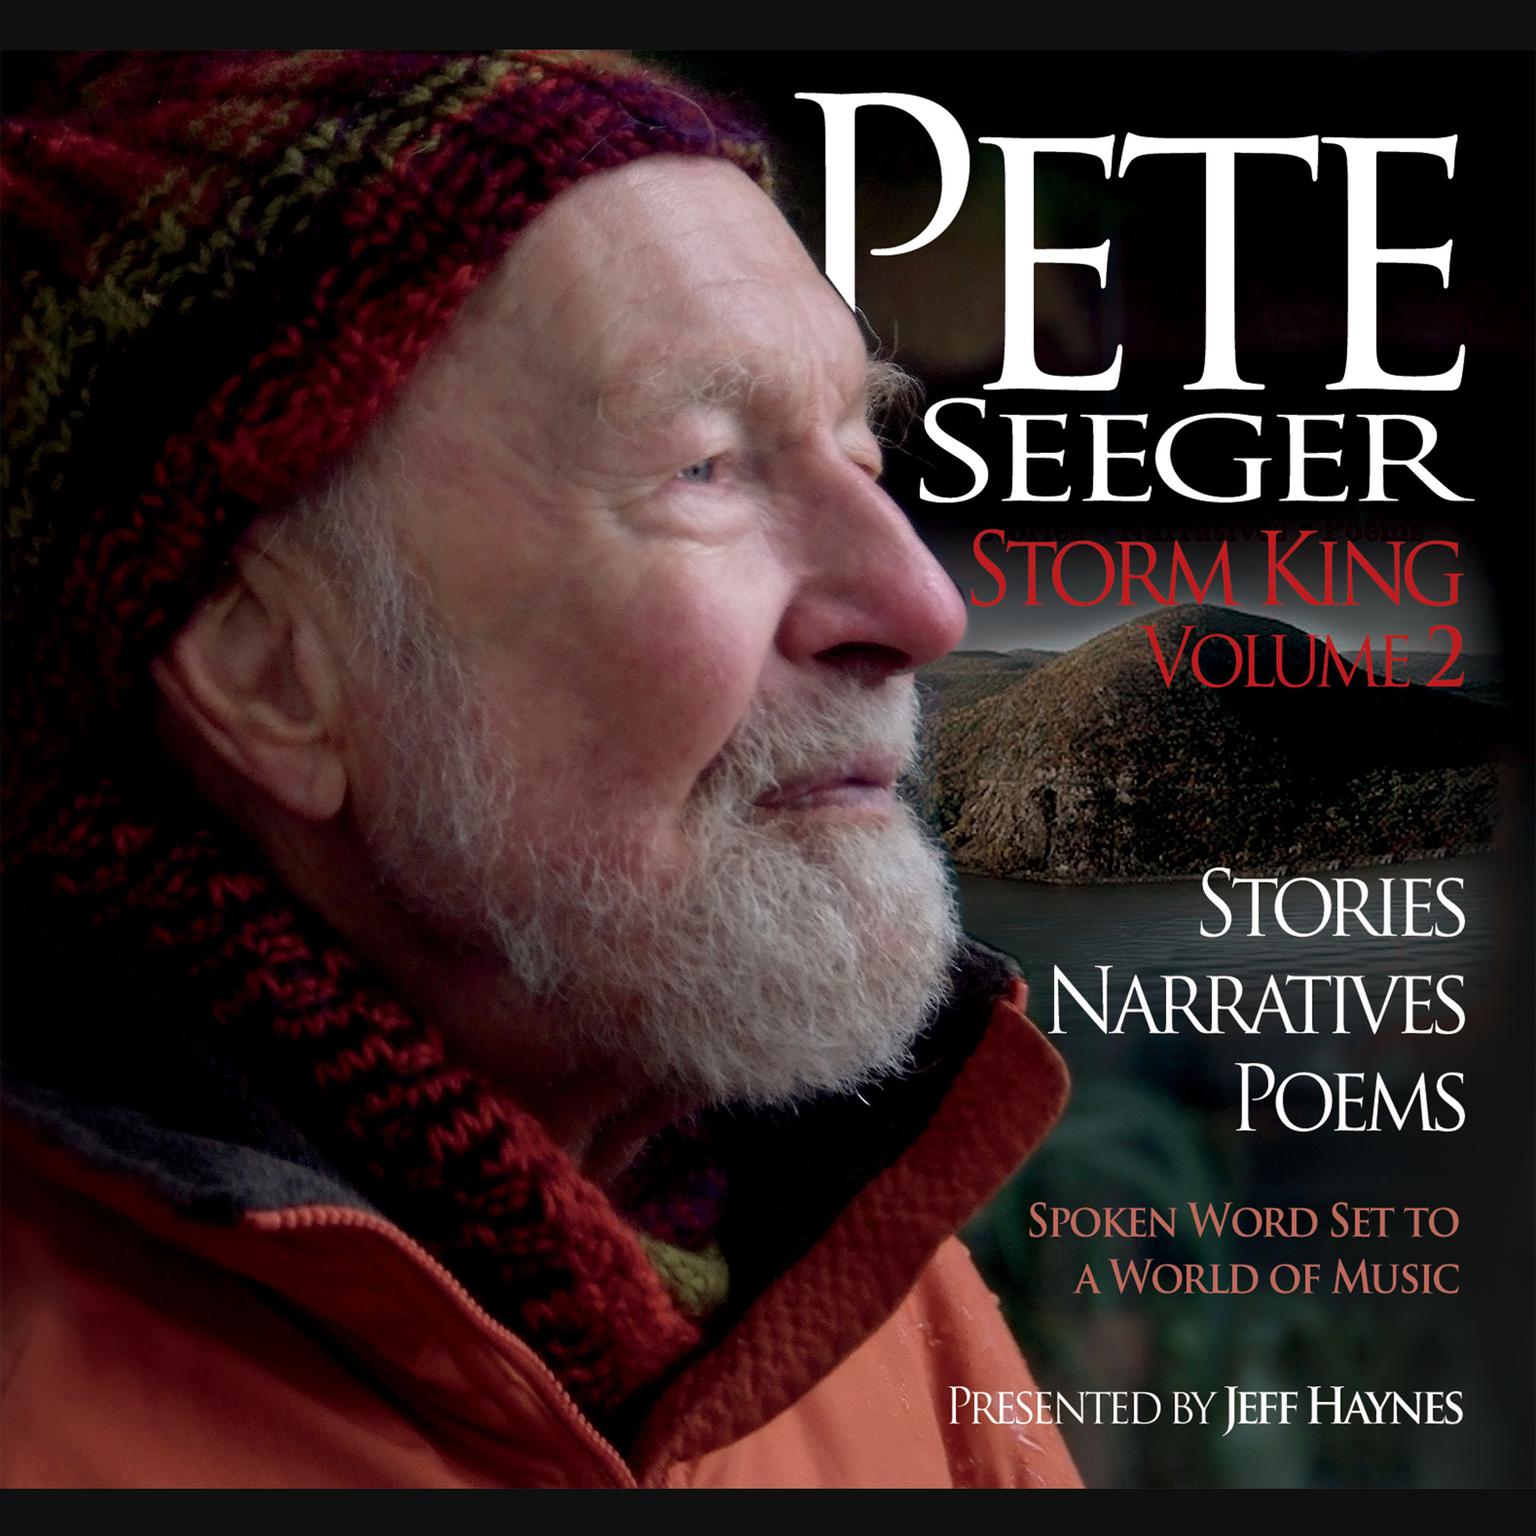 Pete Seeger: Storm King - Volume 2: Stories, Narratives, Poems Audiobook, by Pete Seeger